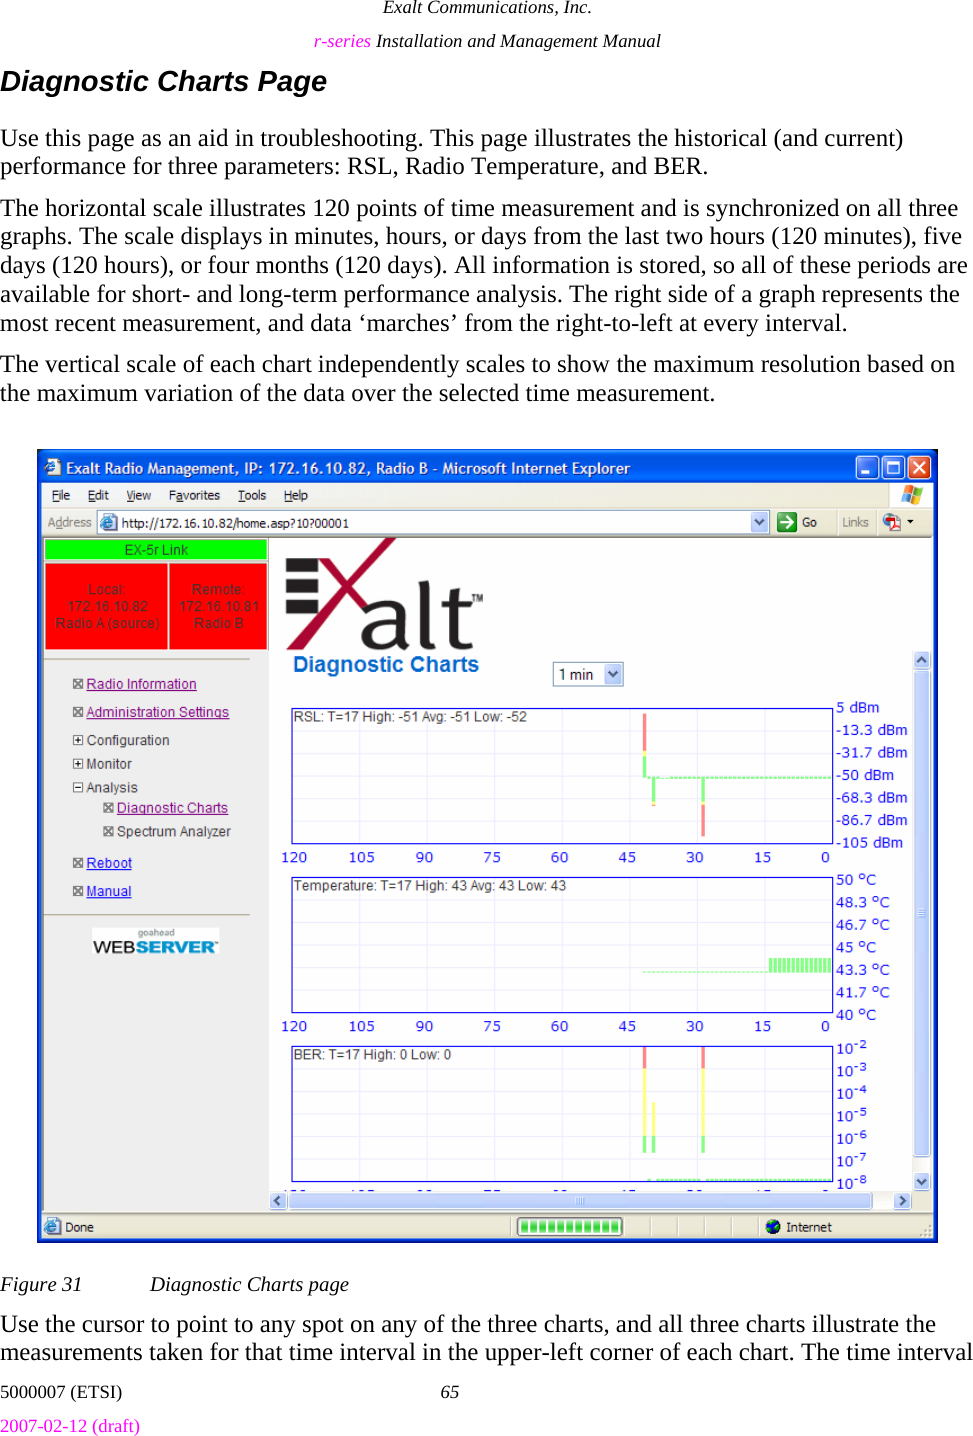 Exalt Communications, Inc. r-series Installation and Management Manual 5000007 (ETSI)  65 2007-02-12 (draft)  Diagnostic Charts Page Use this page as an aid in troubleshooting. This page illustrates the historical (and current) performance for three parameters: RSL, Radio Temperature, and BER. The horizontal scale illustrates 120 points of time measurement and is synchronized on all three graphs. The scale displays in minutes, hours, or days from the last two hours (120 minutes), five  days (120 hours), or four months (120 days). All information is stored, so all of these periods are available for short- and long-term performance analysis. The right side of a graph represents the most recent measurement, and data ‘marches’ from the right-to-left at every interval. The vertical scale of each chart independently scales to show the maximum resolution based on the maximum variation of the data over the selected time measurement.  Figure 31  Diagnostic Charts page Use the cursor to point to any spot on any of the three charts, and all three charts illustrate the measurements taken for that time interval in the upper-left corner of each chart. The time interval 